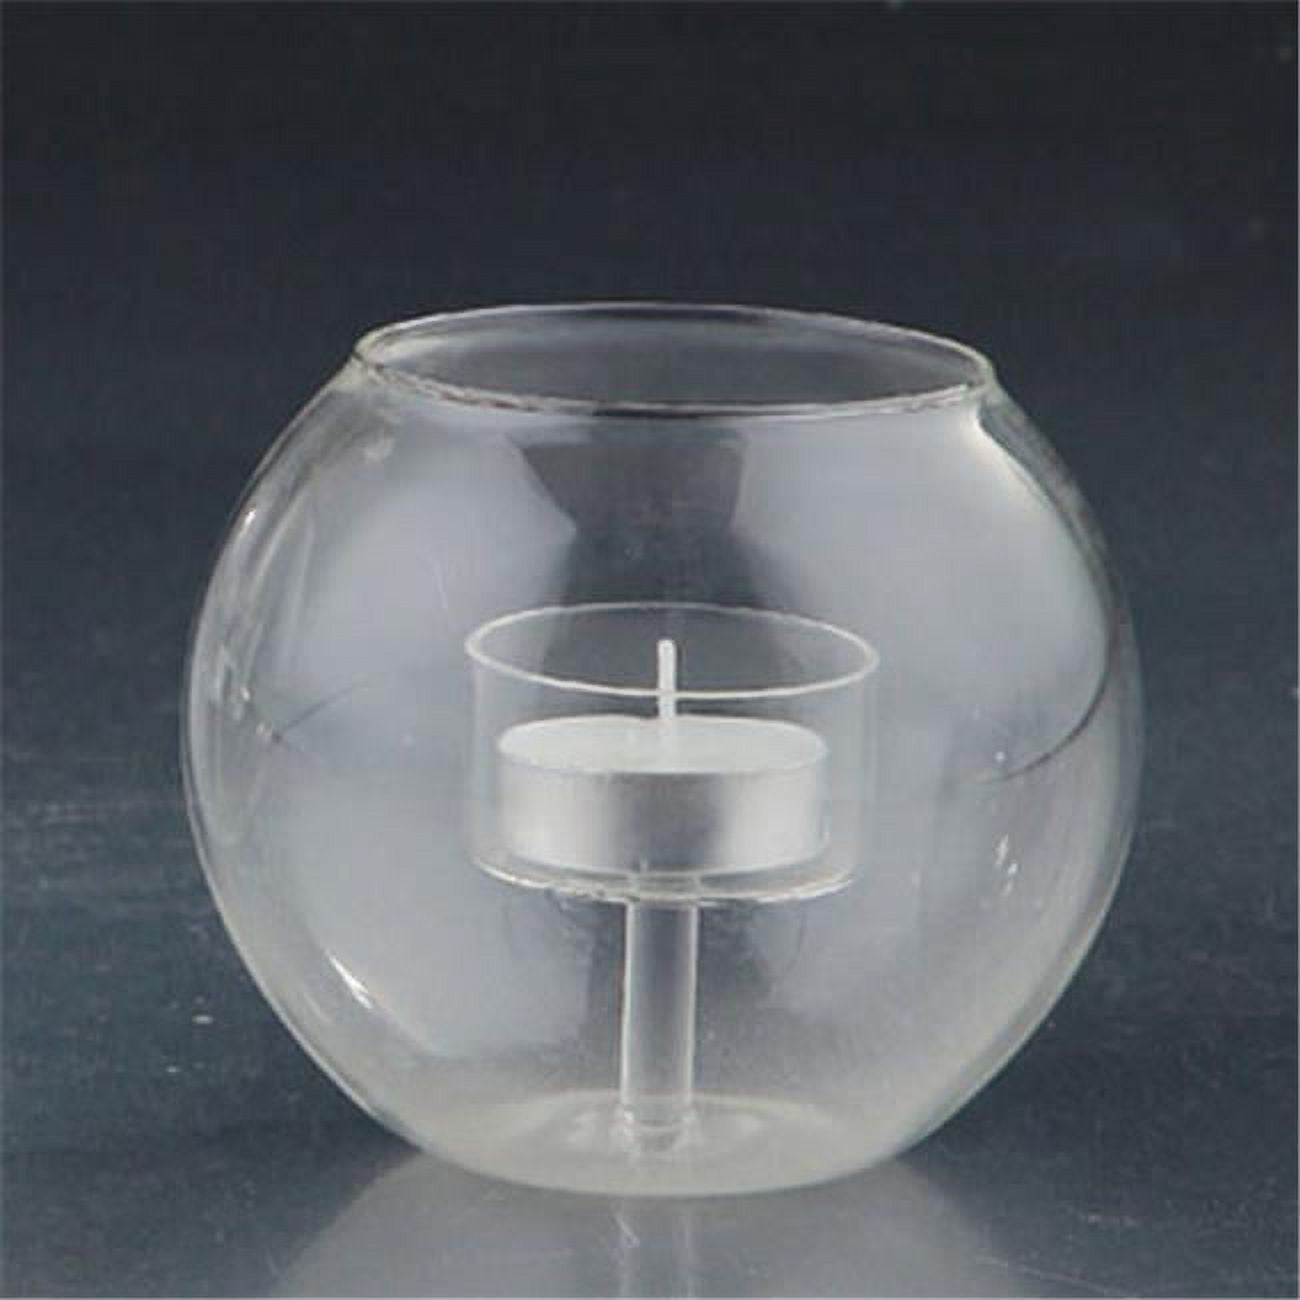 77001 3.5 x 4.5 in. Glass Candle Holder, Clear -  Diamond Star